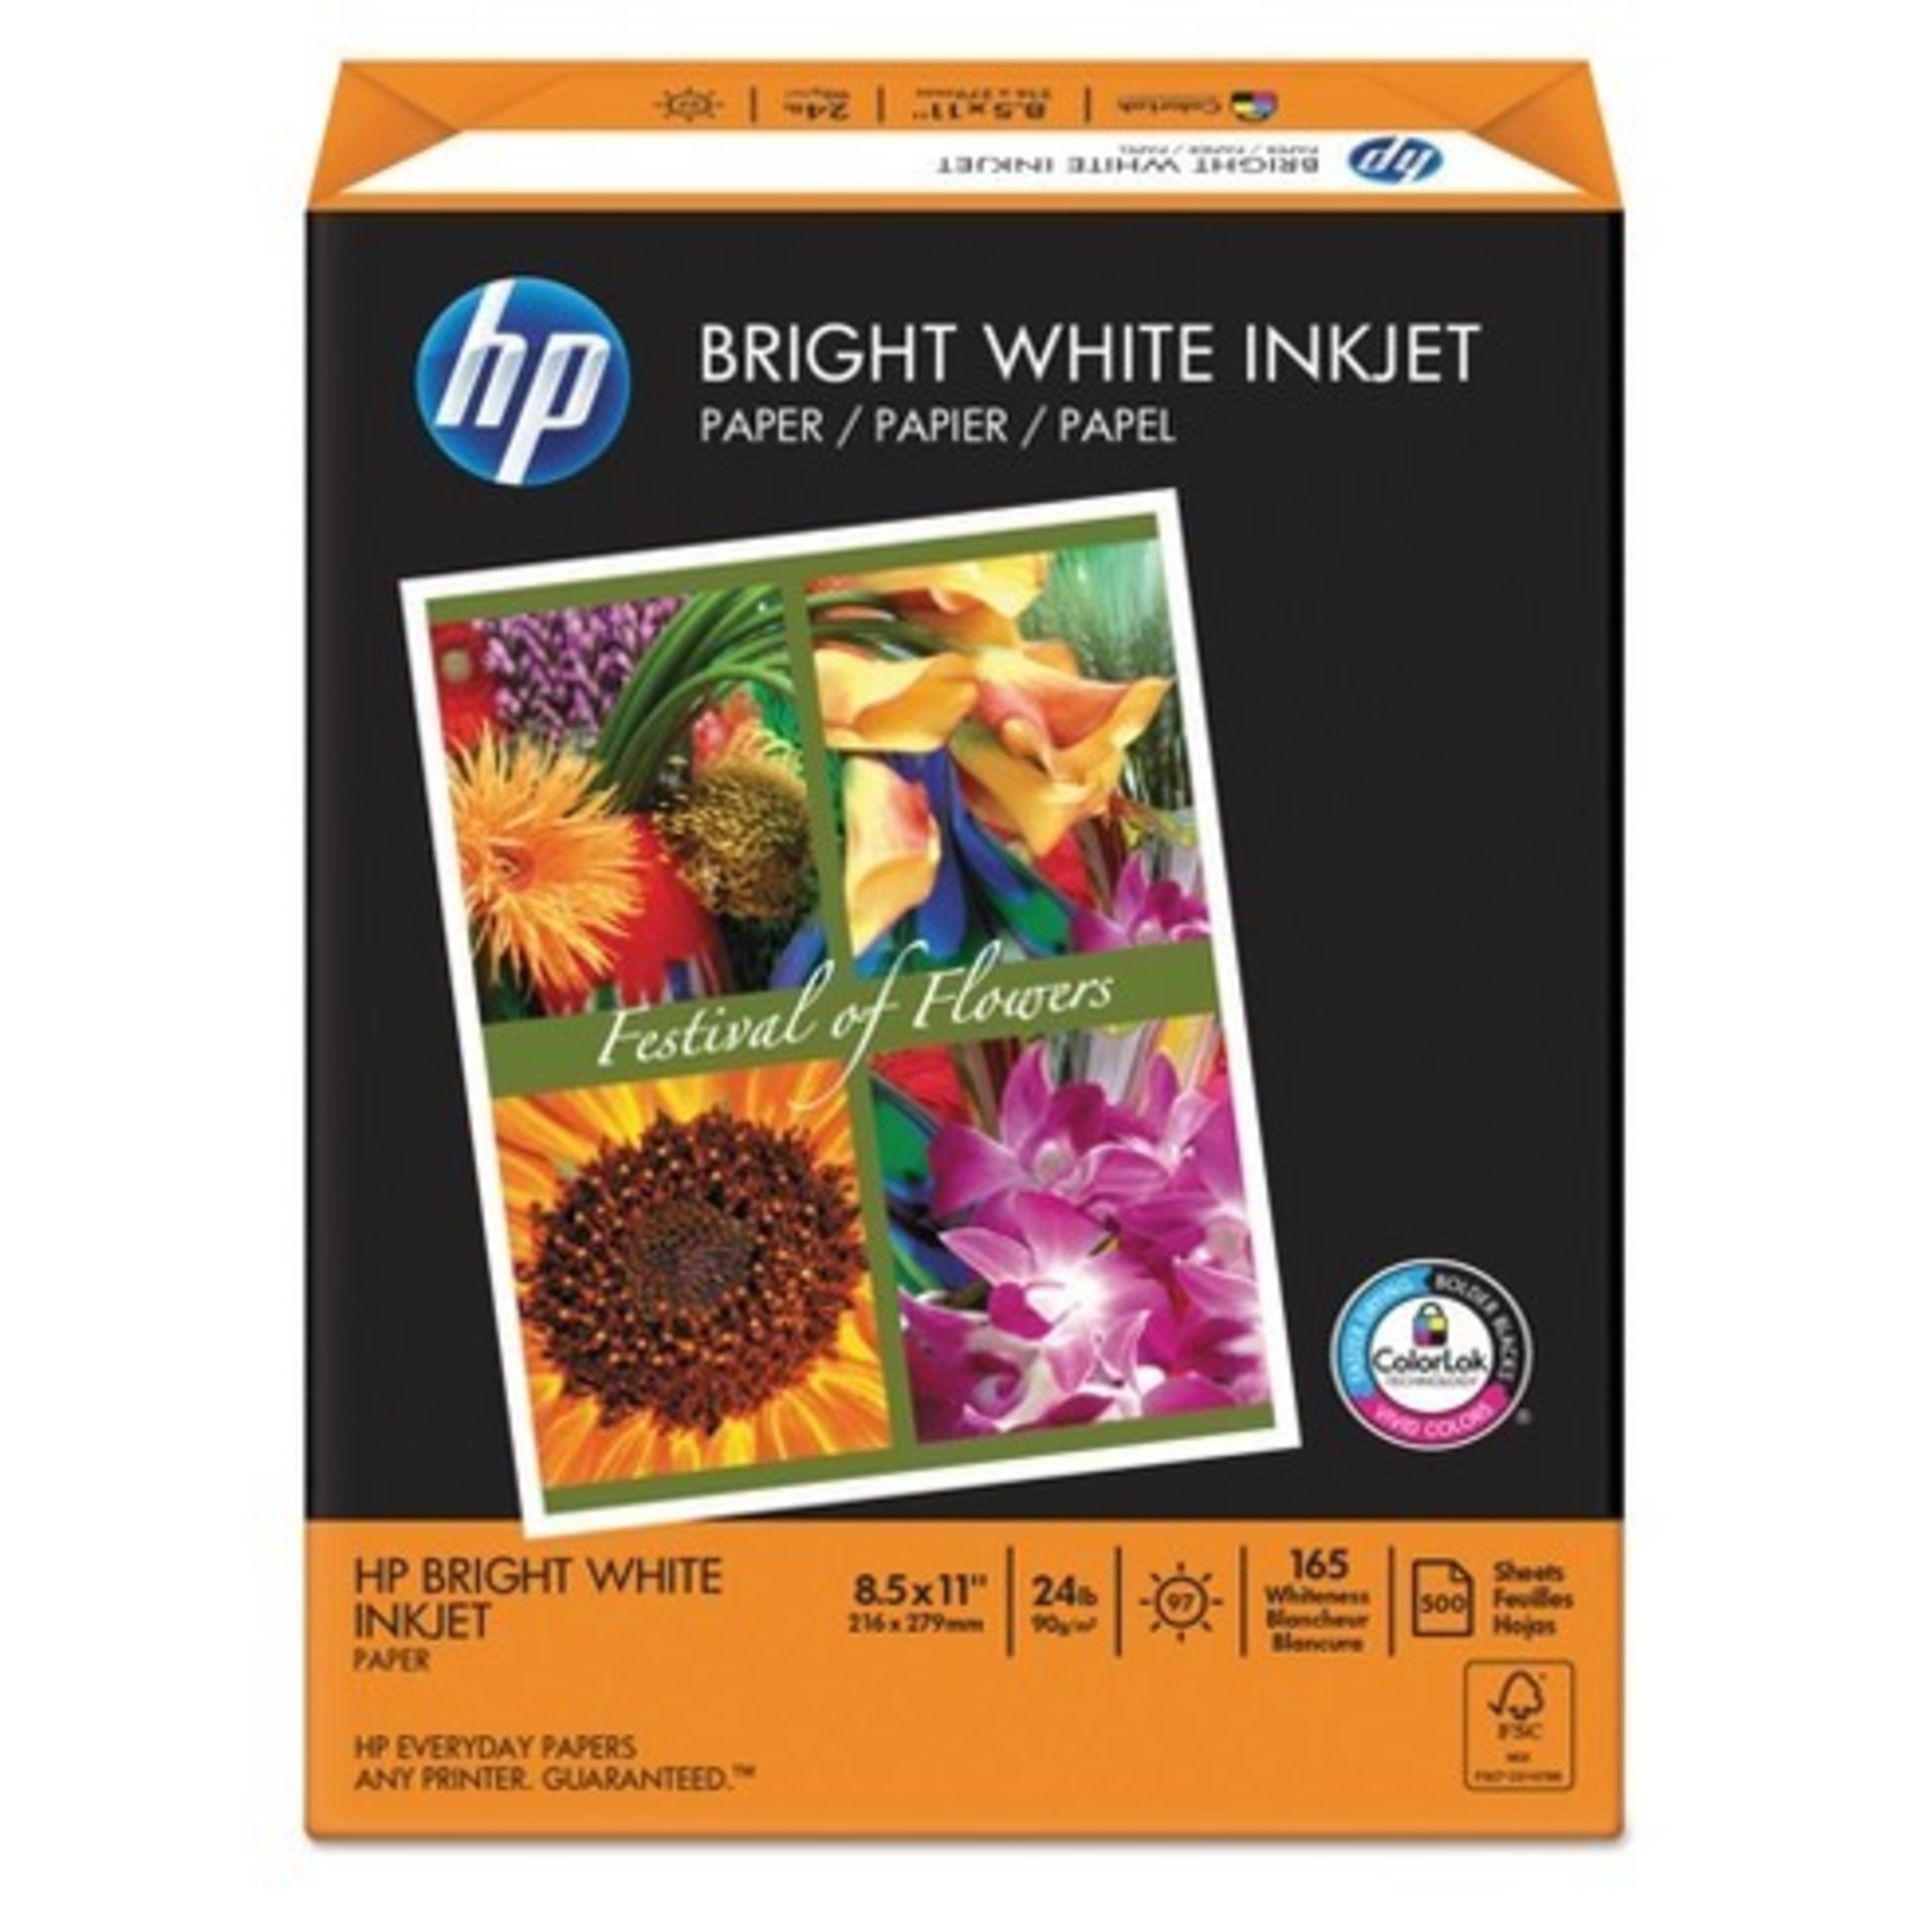 1 BOXED HP RIGHT WHITE INKJET PAPER (P/N - 45) / RRP £45.59 (VIEWING HIGHLY RECOMMENDED)